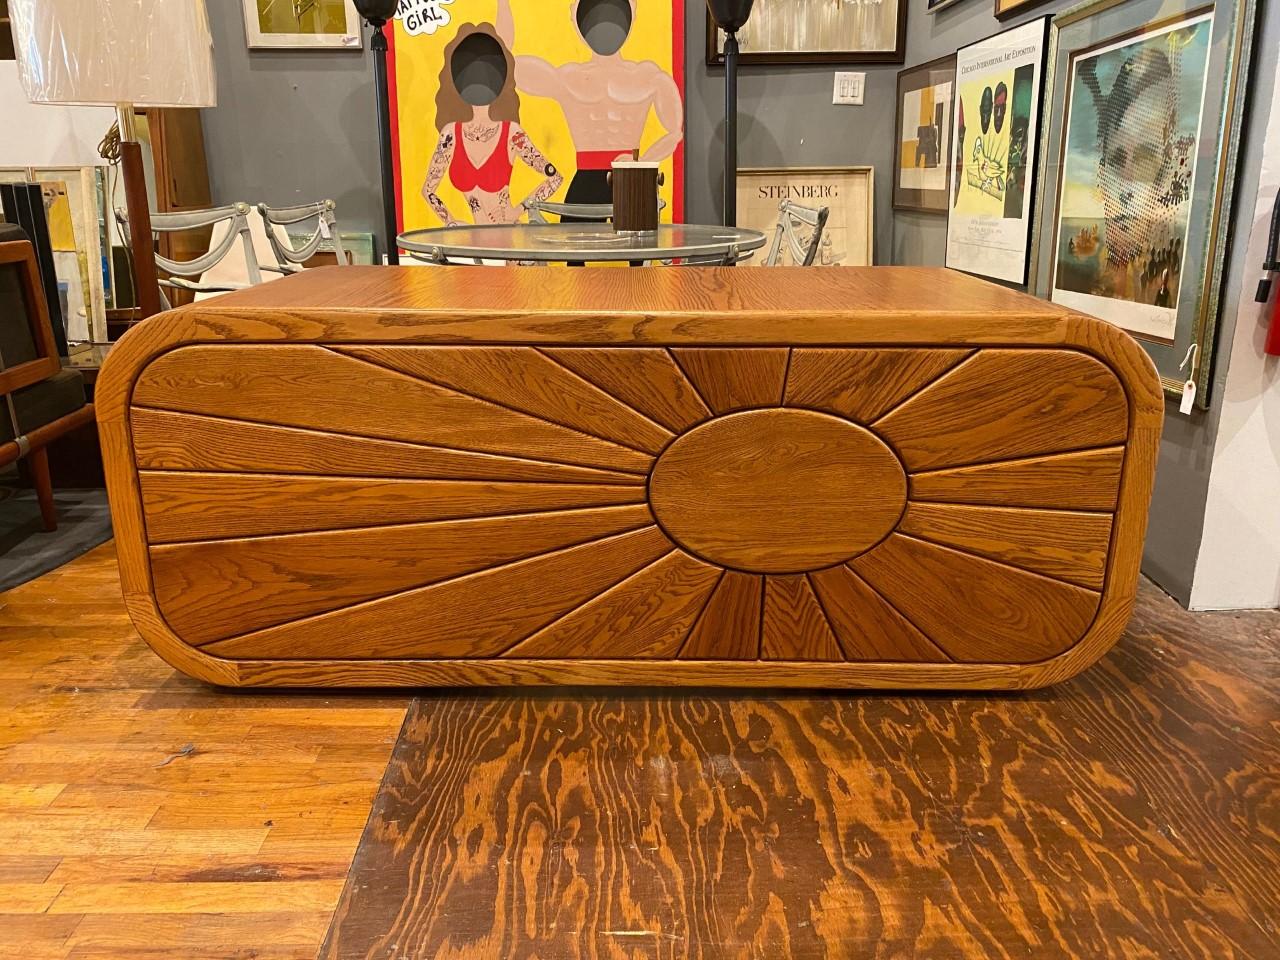 A unique silhouette with generous curves and an impacting yet joyful sculpture on the front, this desk is a one of a kind. This piece dates back to the 1970s and it manifests a design aesthetic that is full of optimism and light. The piece is